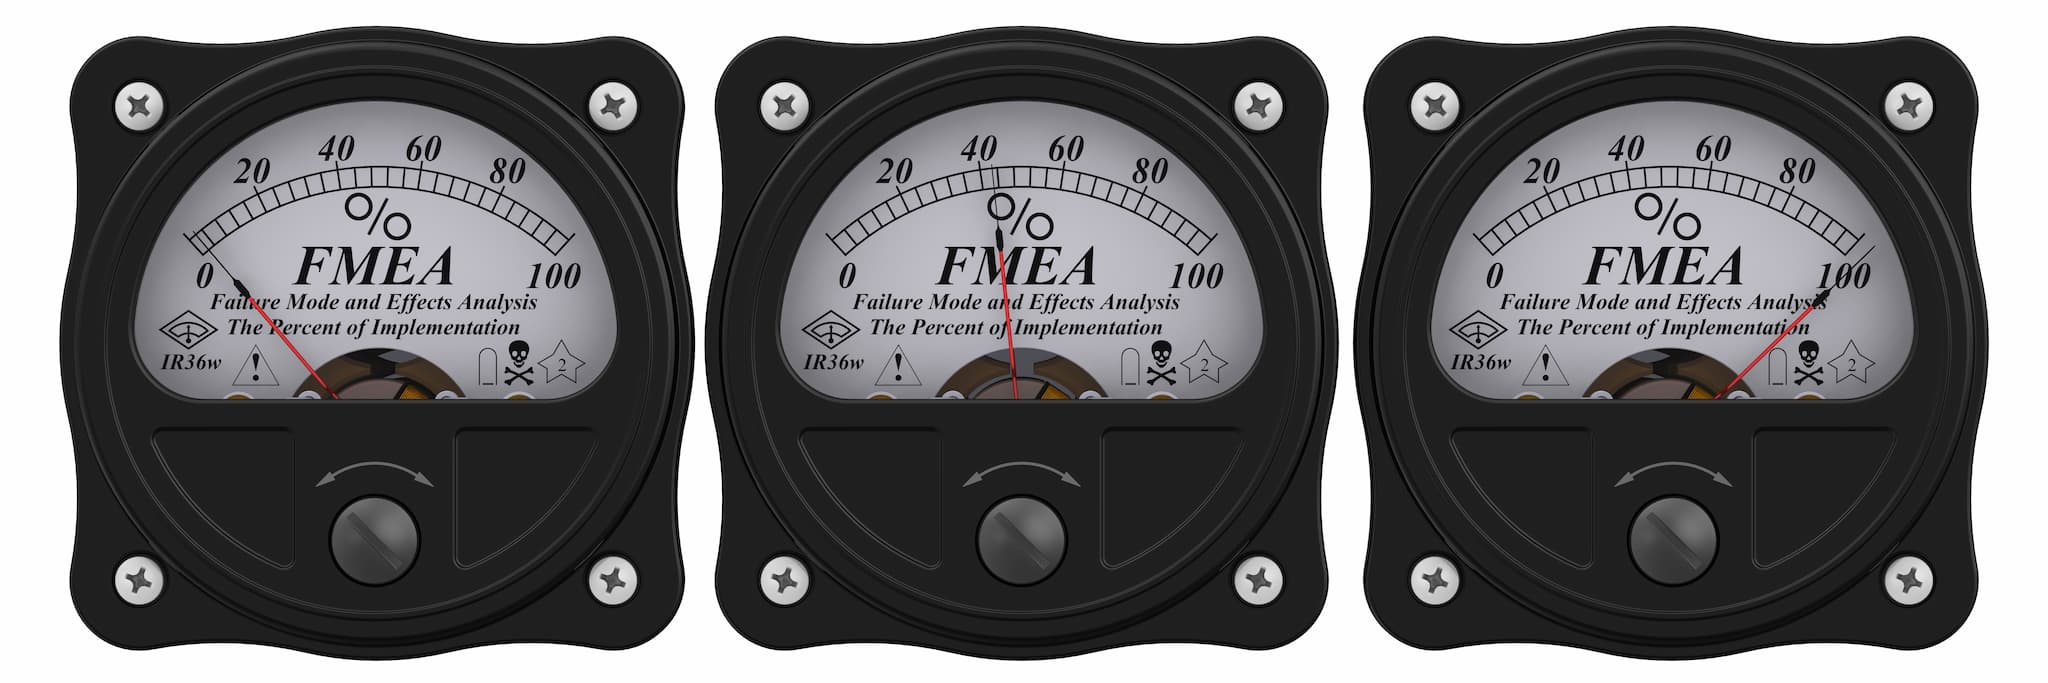 three barometers in a row, labeled FMEA